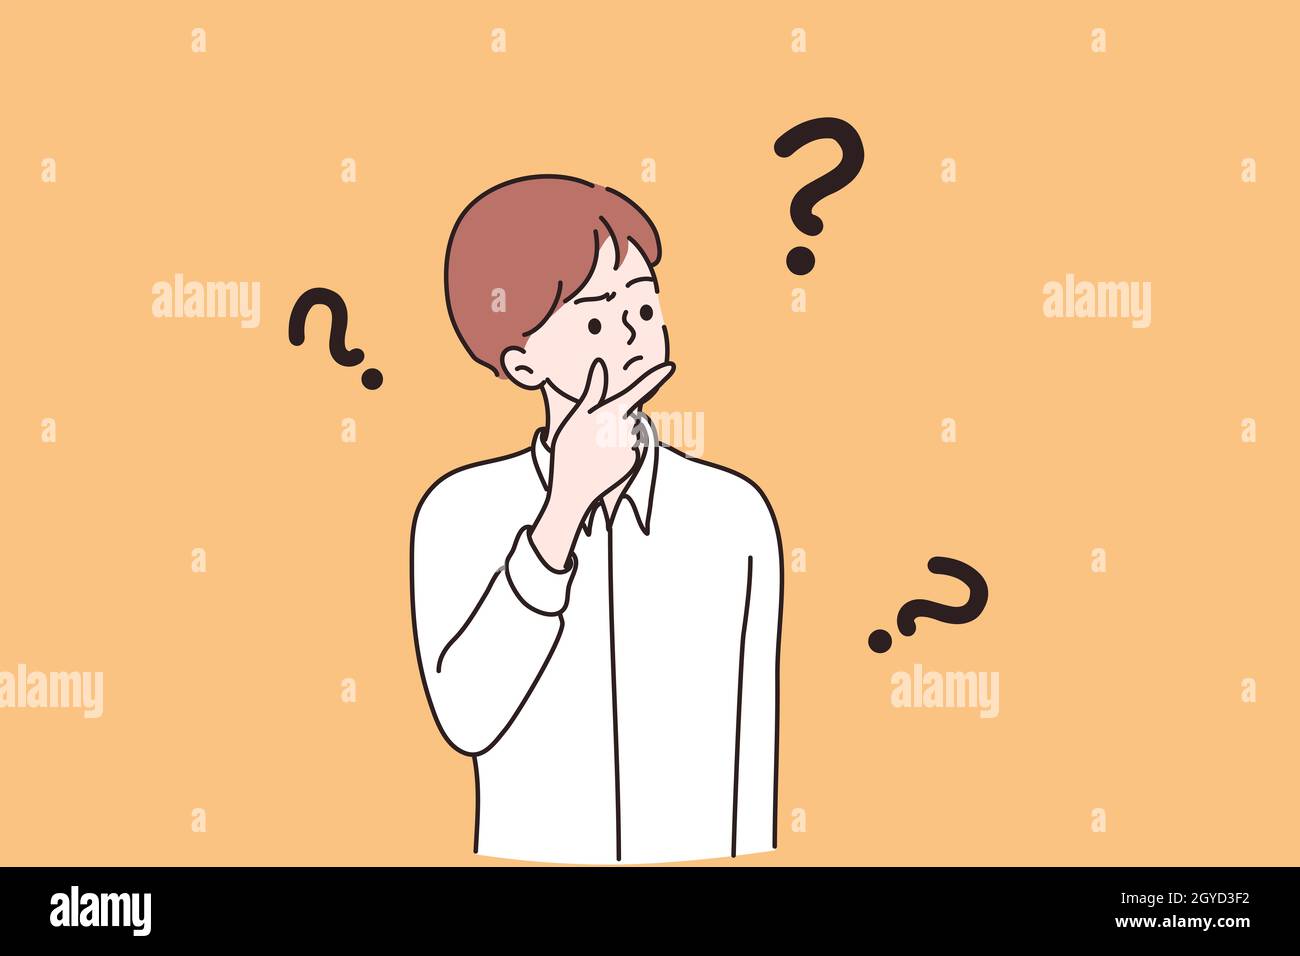 Feeling doubt, question, making decision concept. Young frustrated man or boy cartoon character standing feeling doubt with question signs above vecto Stock Photo